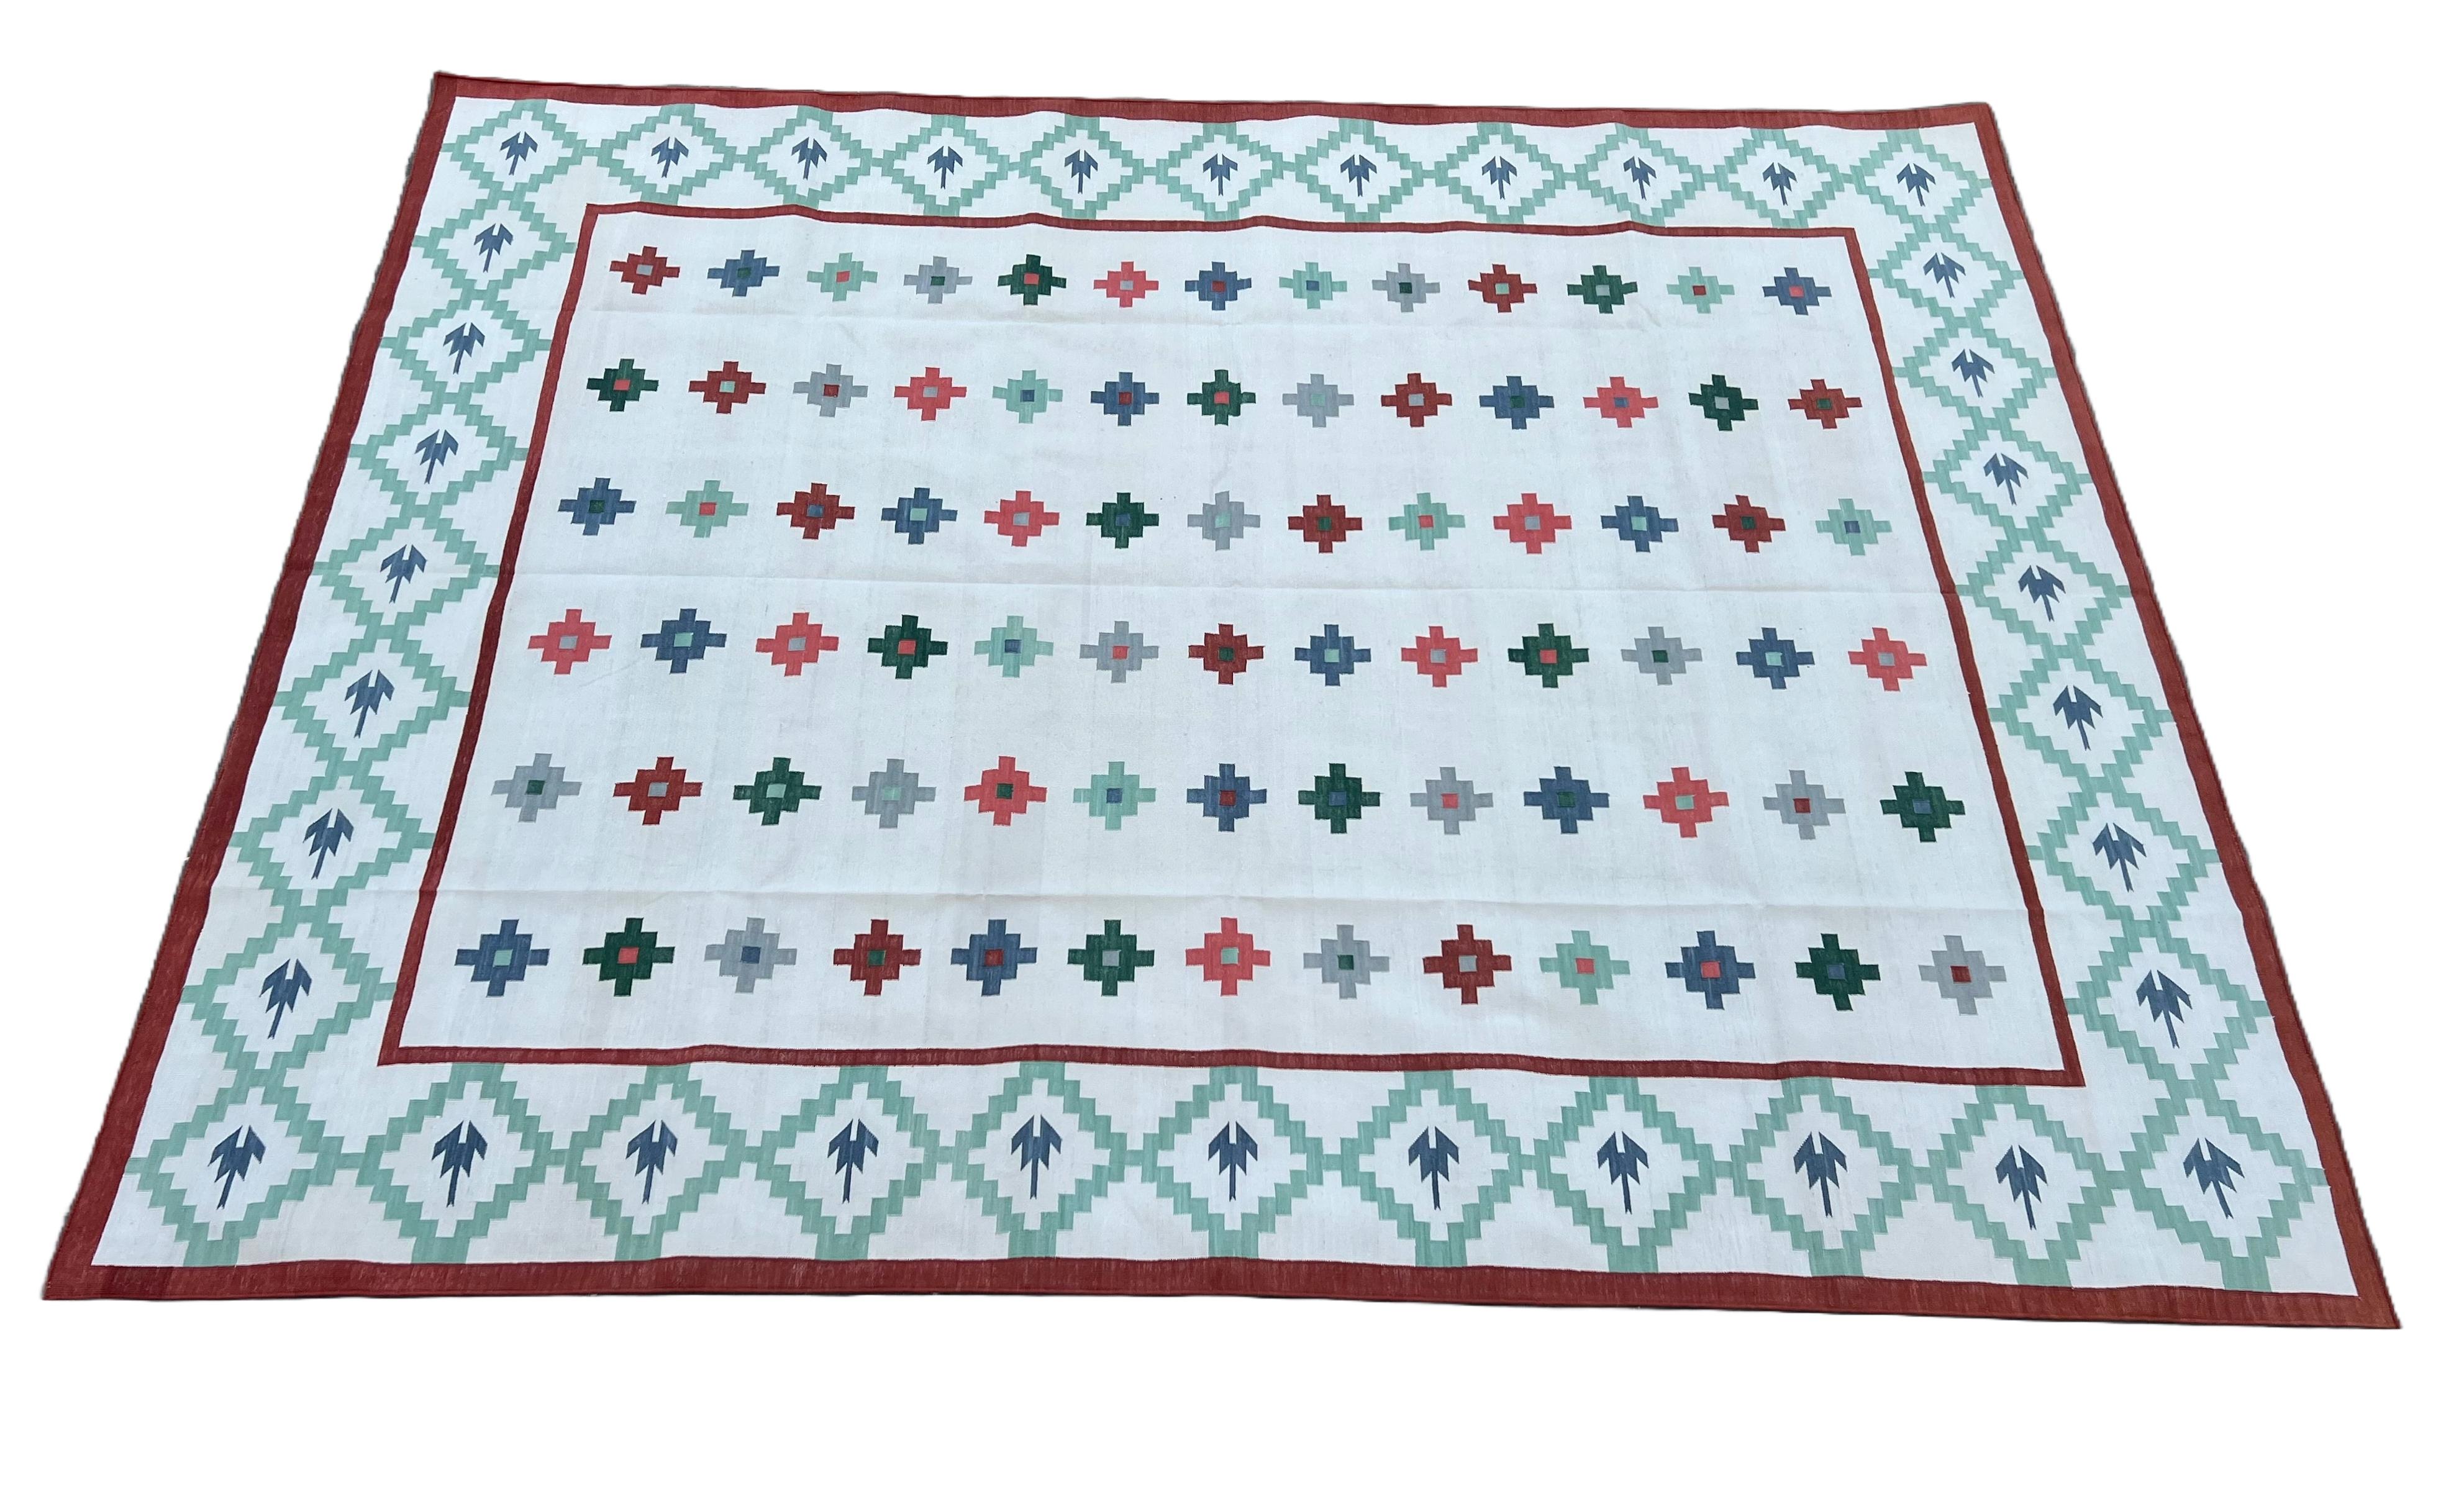 Cotton Vegetable Dyed Reversible Cream And Green Indian Star Geometric Rug - 6'x9'
These special flat-weave dhurries are hand-woven with 15 ply 100% cotton yarn. Due to the special manufacturing techniques used to create our rugs, the size and color